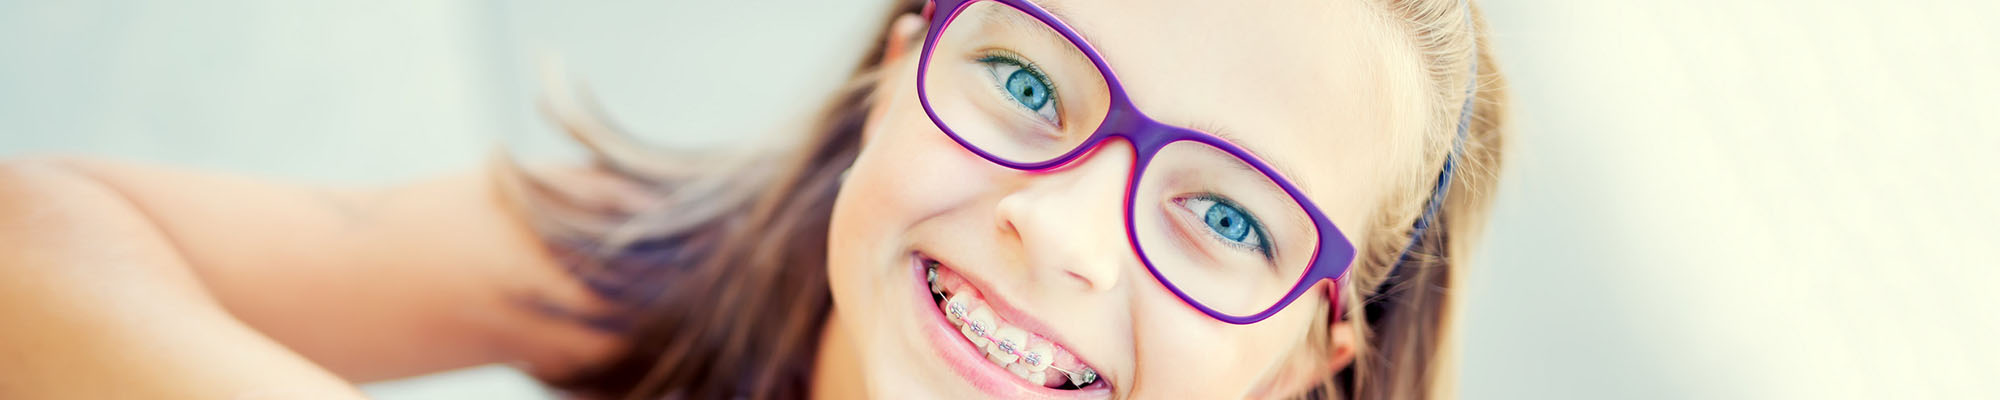 your child s first orthodontic checkup